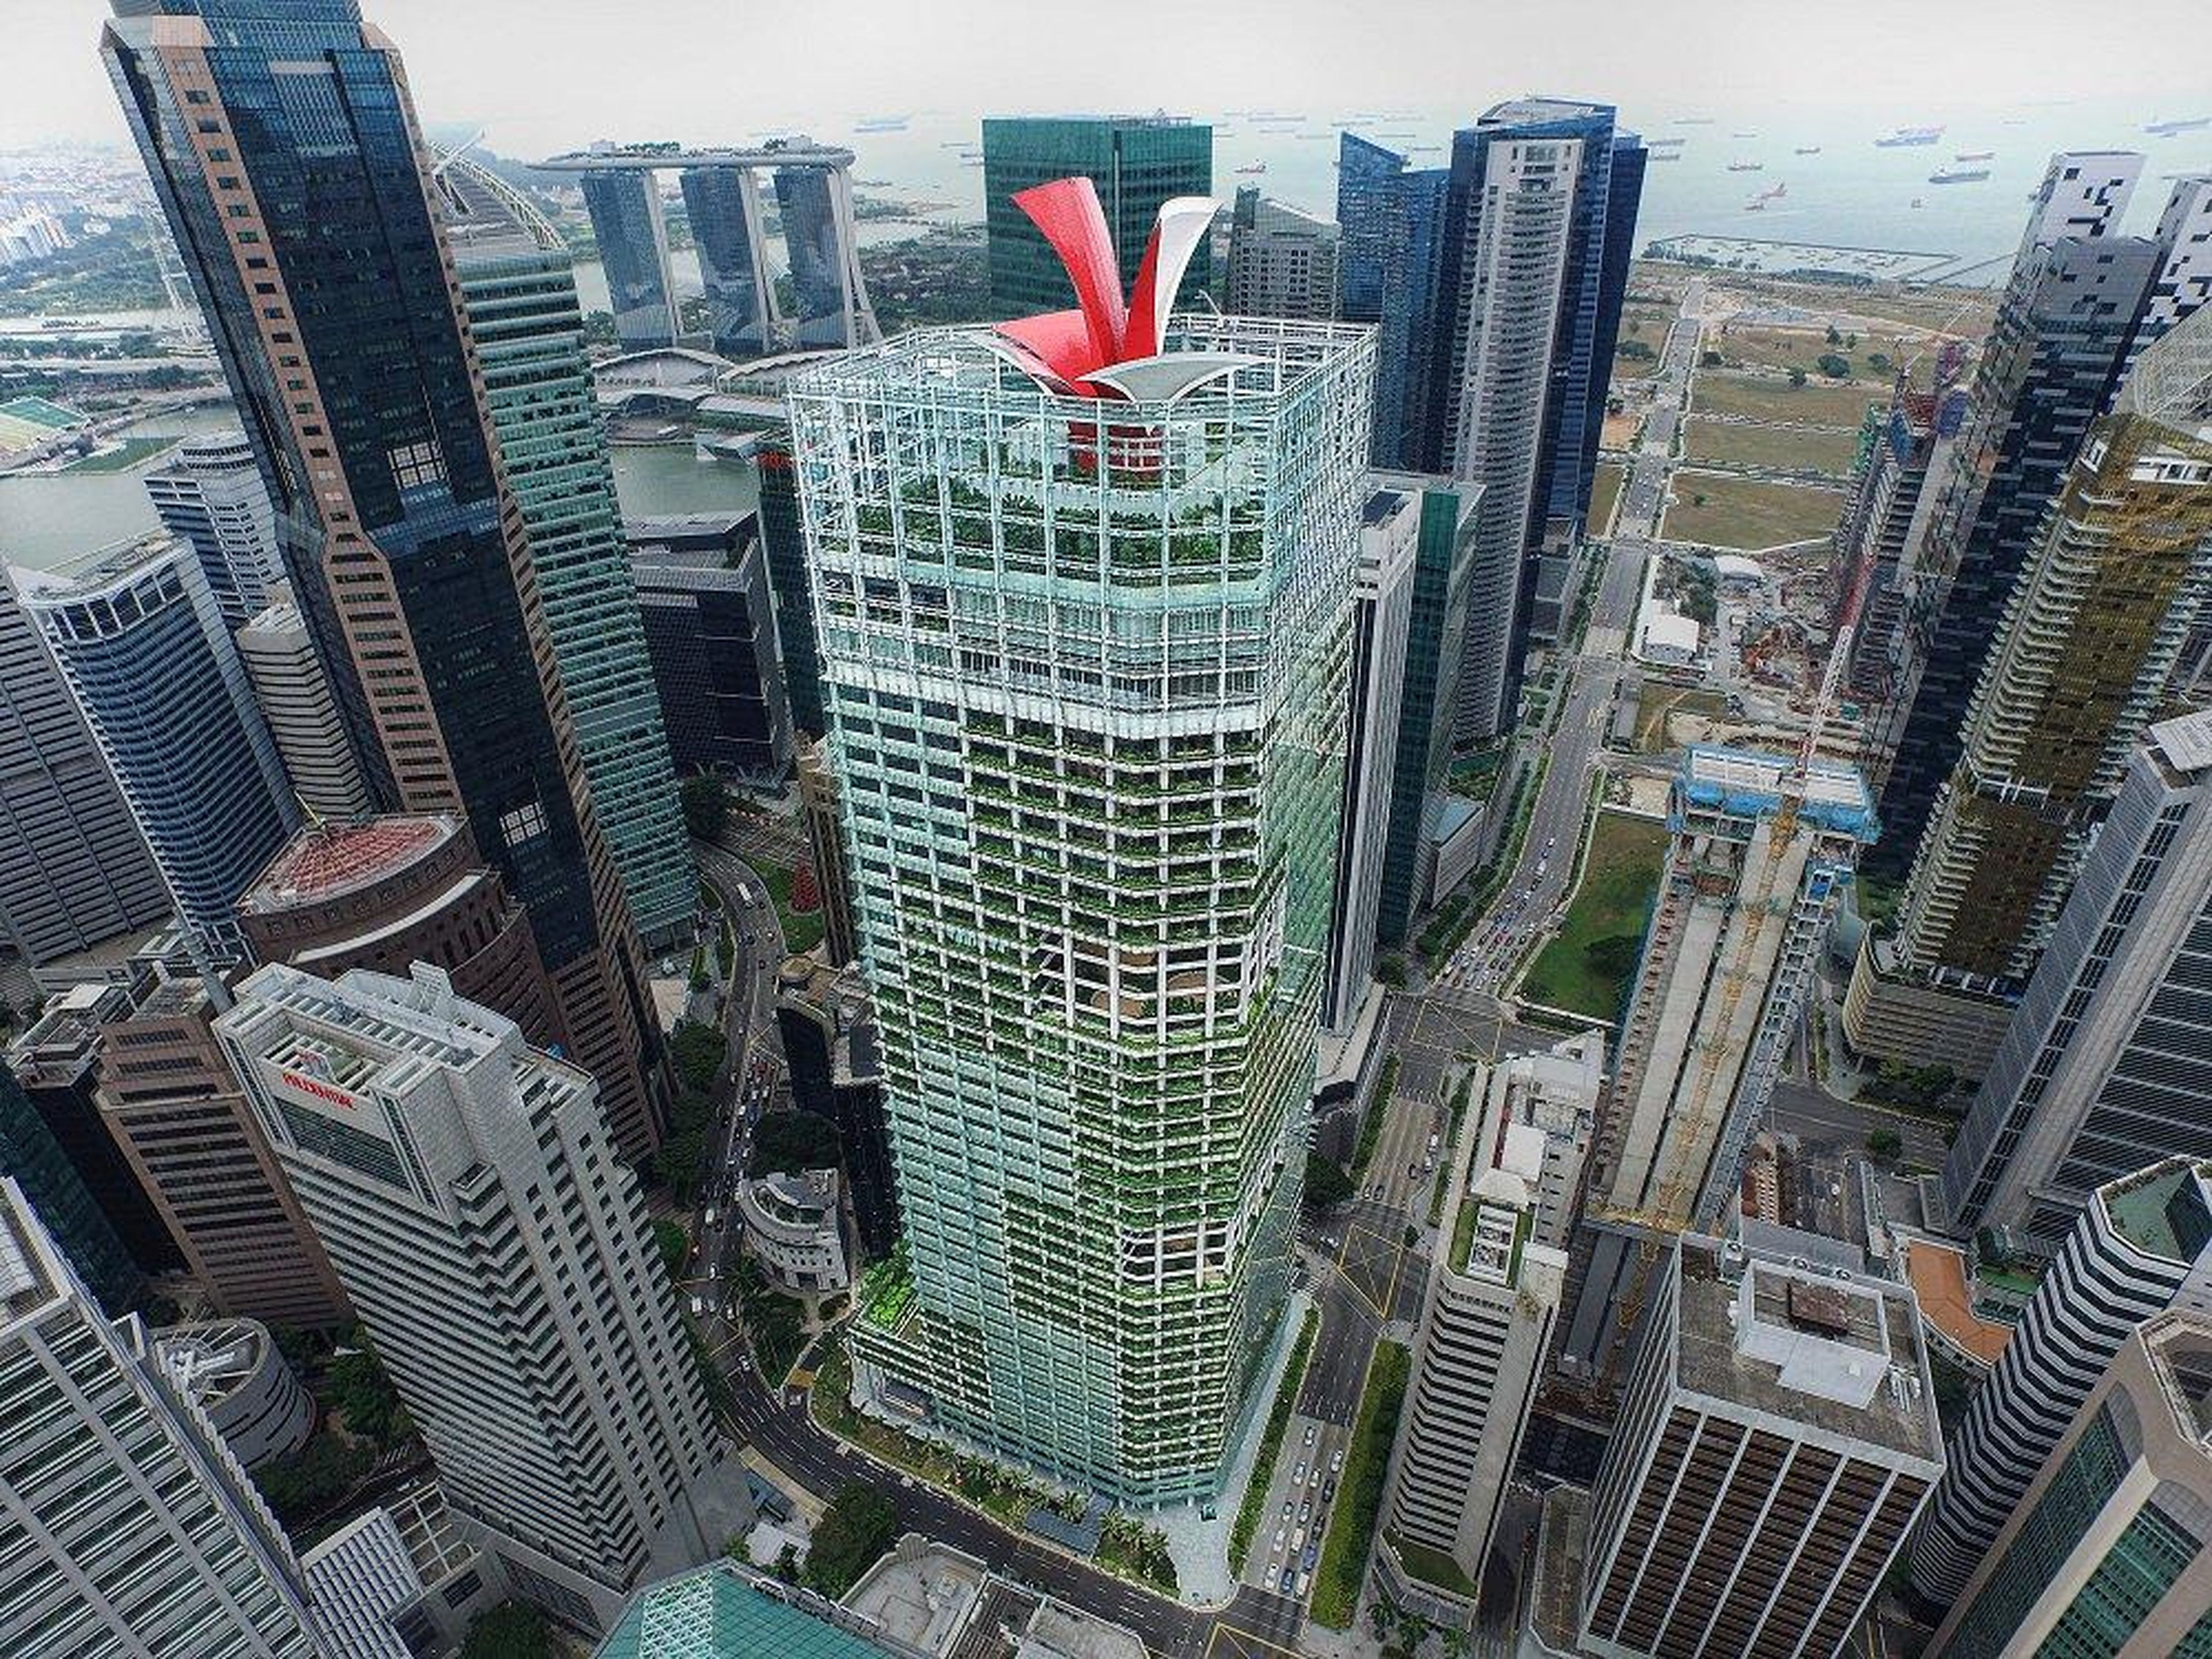 Completed in 2014, Singapore's CapitaGreen tower cost an estimated $1.4 billion.